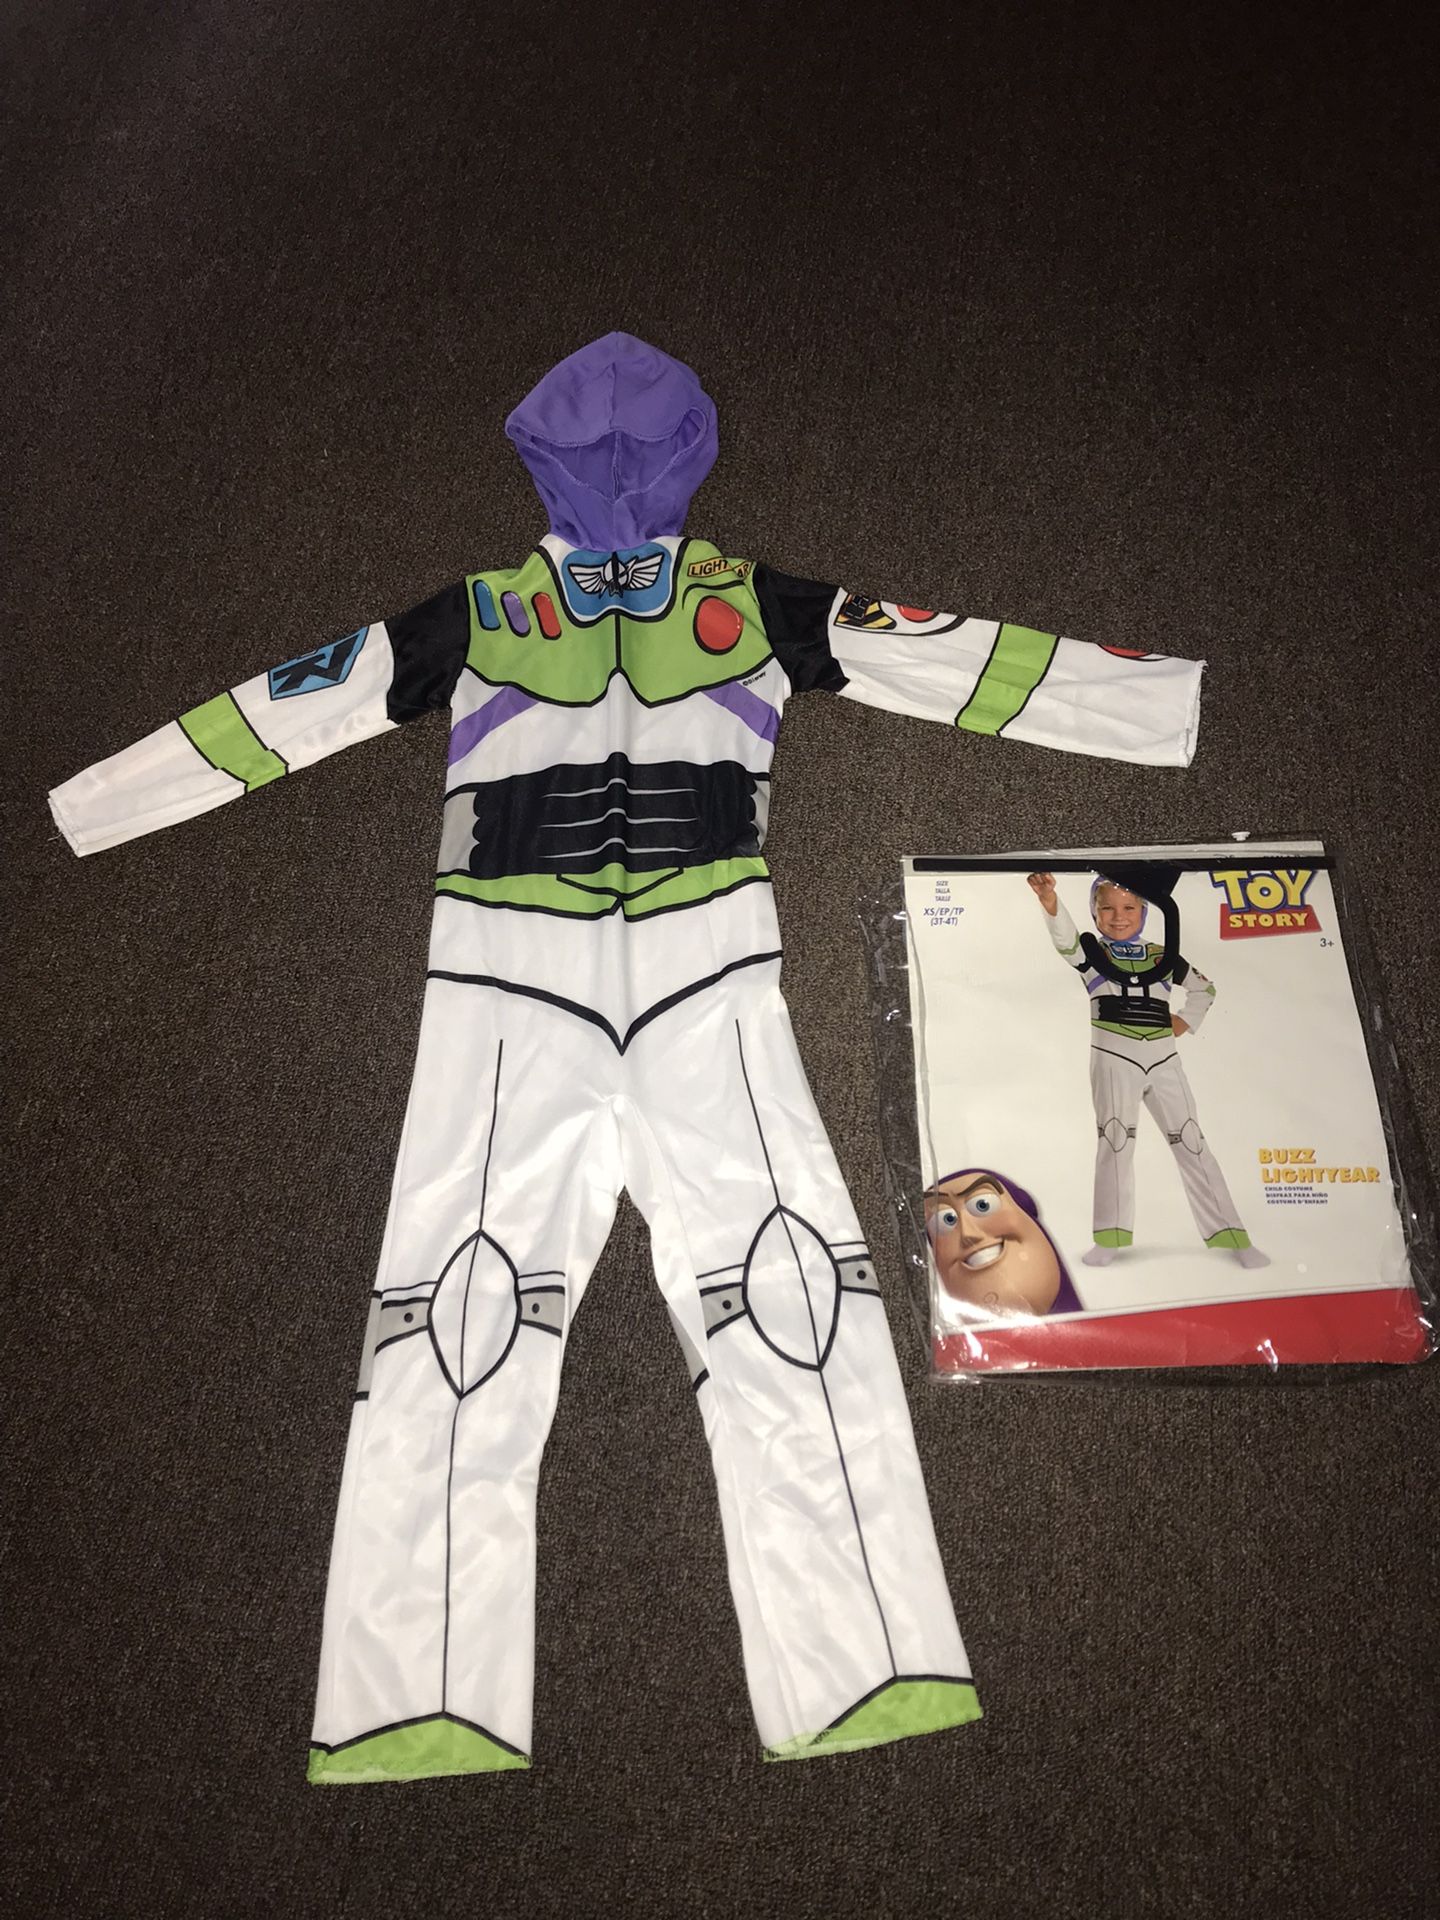 Toy Story Buzz Lightyear  Costume And Talking Wing Jet Pack 